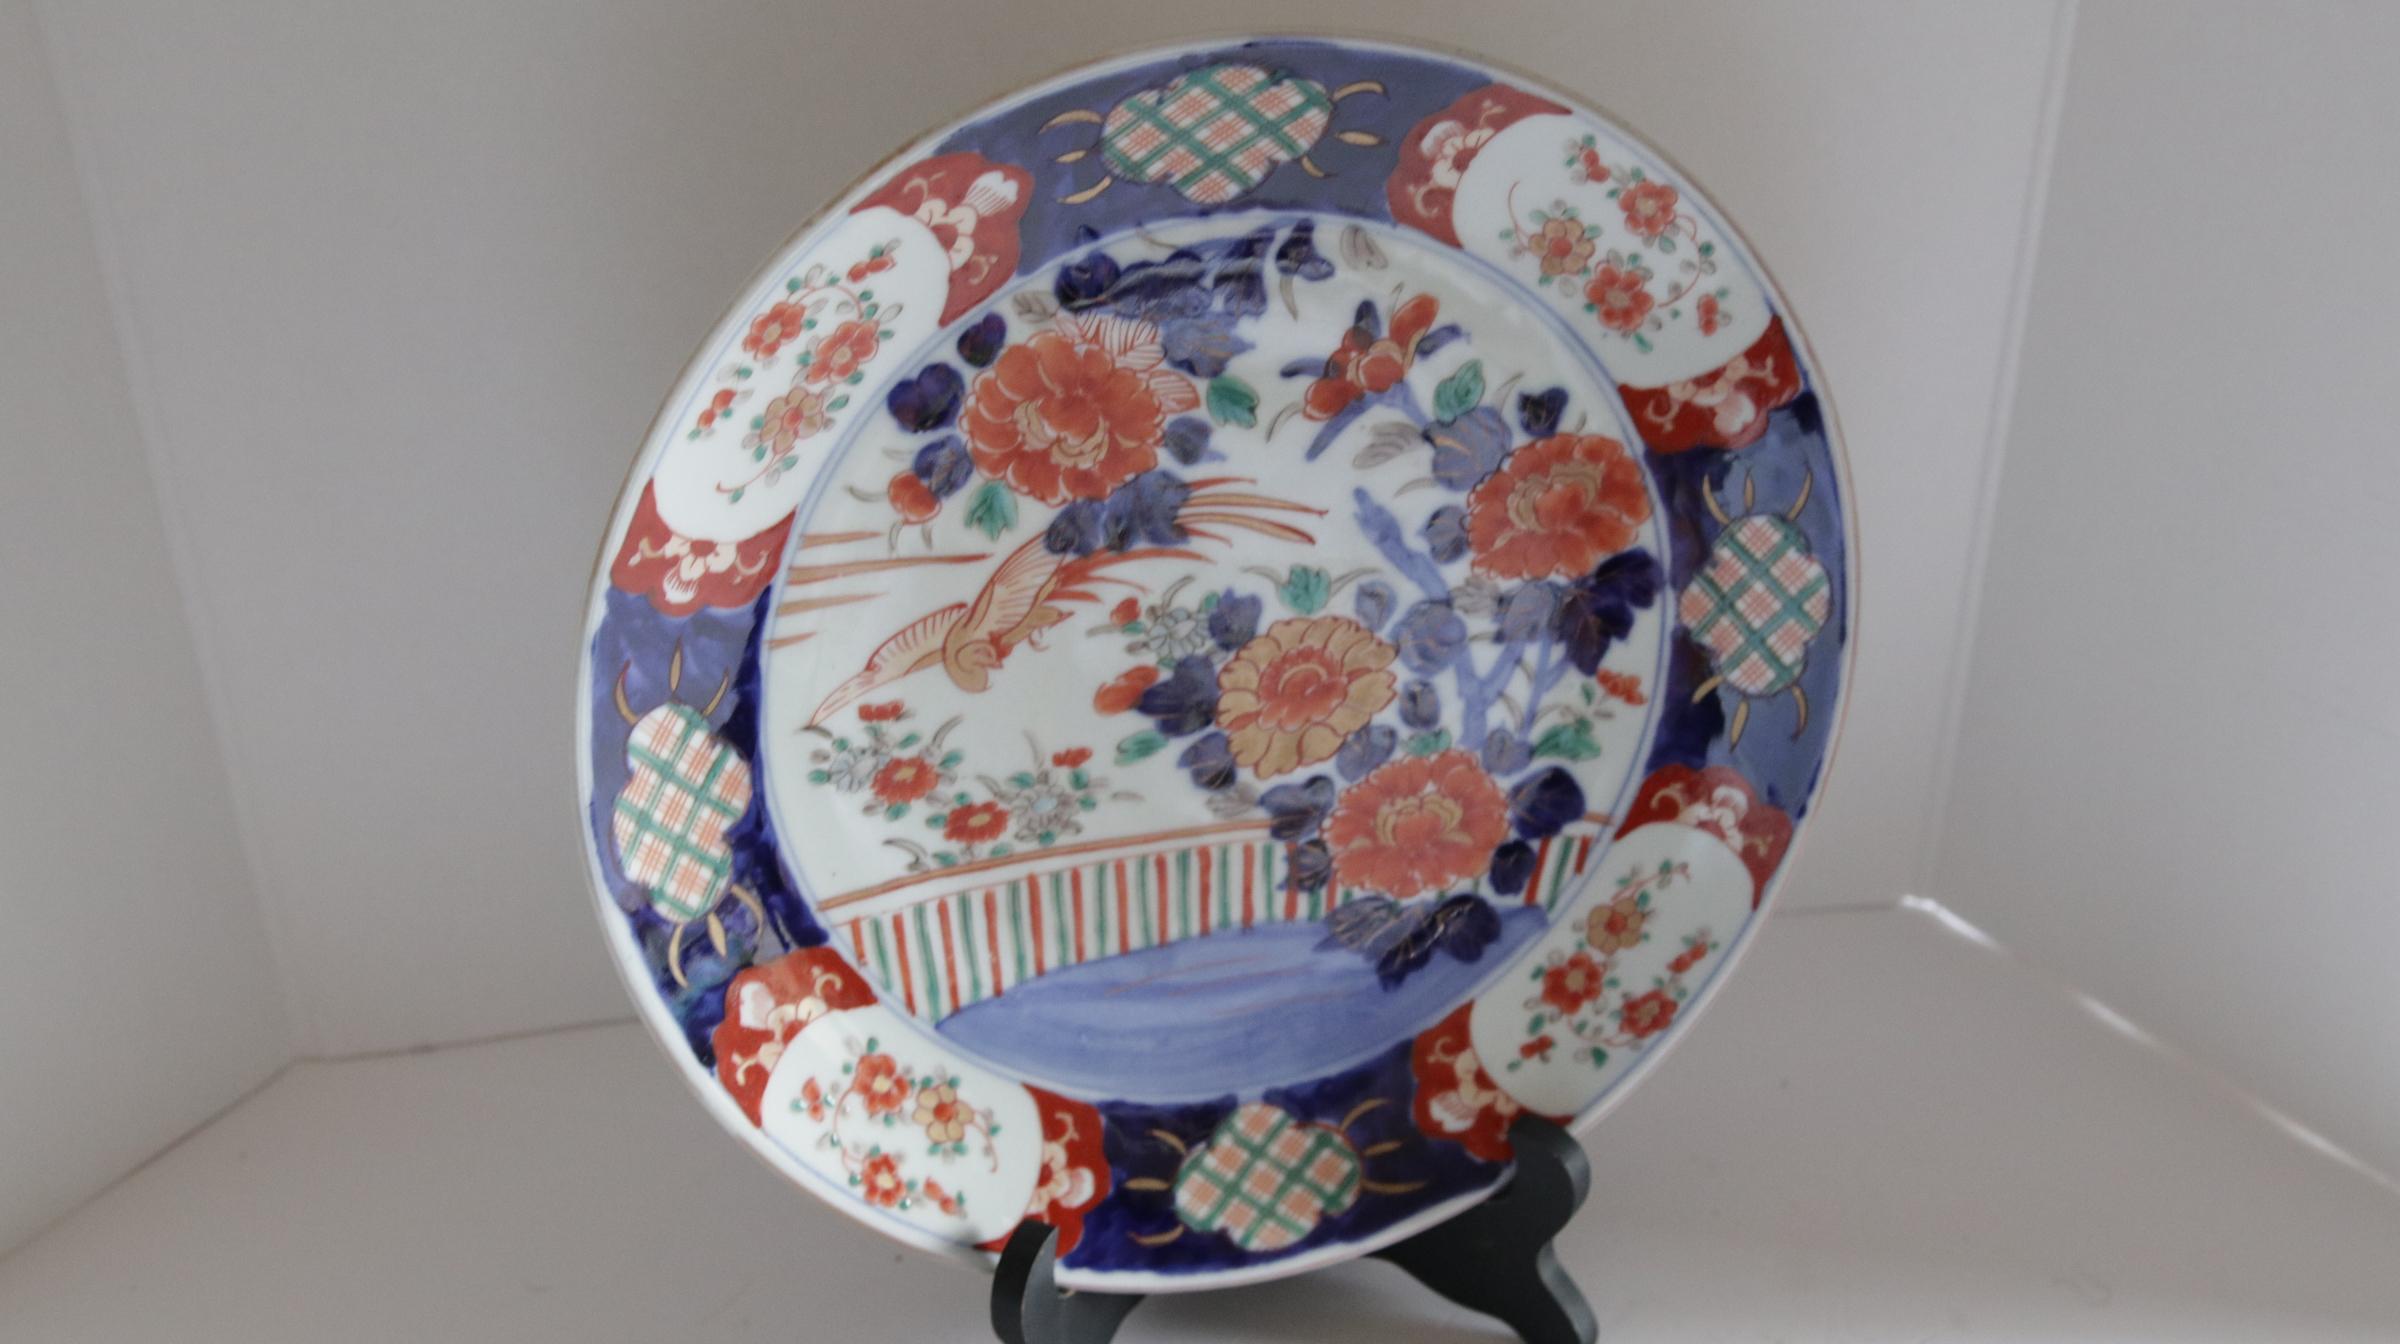 This Japanese Export porcelain charger is singular and speaks for itself in a beautiful palette of soft orange, blue and white. It is remimiscent of Imari, but the appraisers say it is from a 17th or 18th century kiln in Arita Japan. The colors are